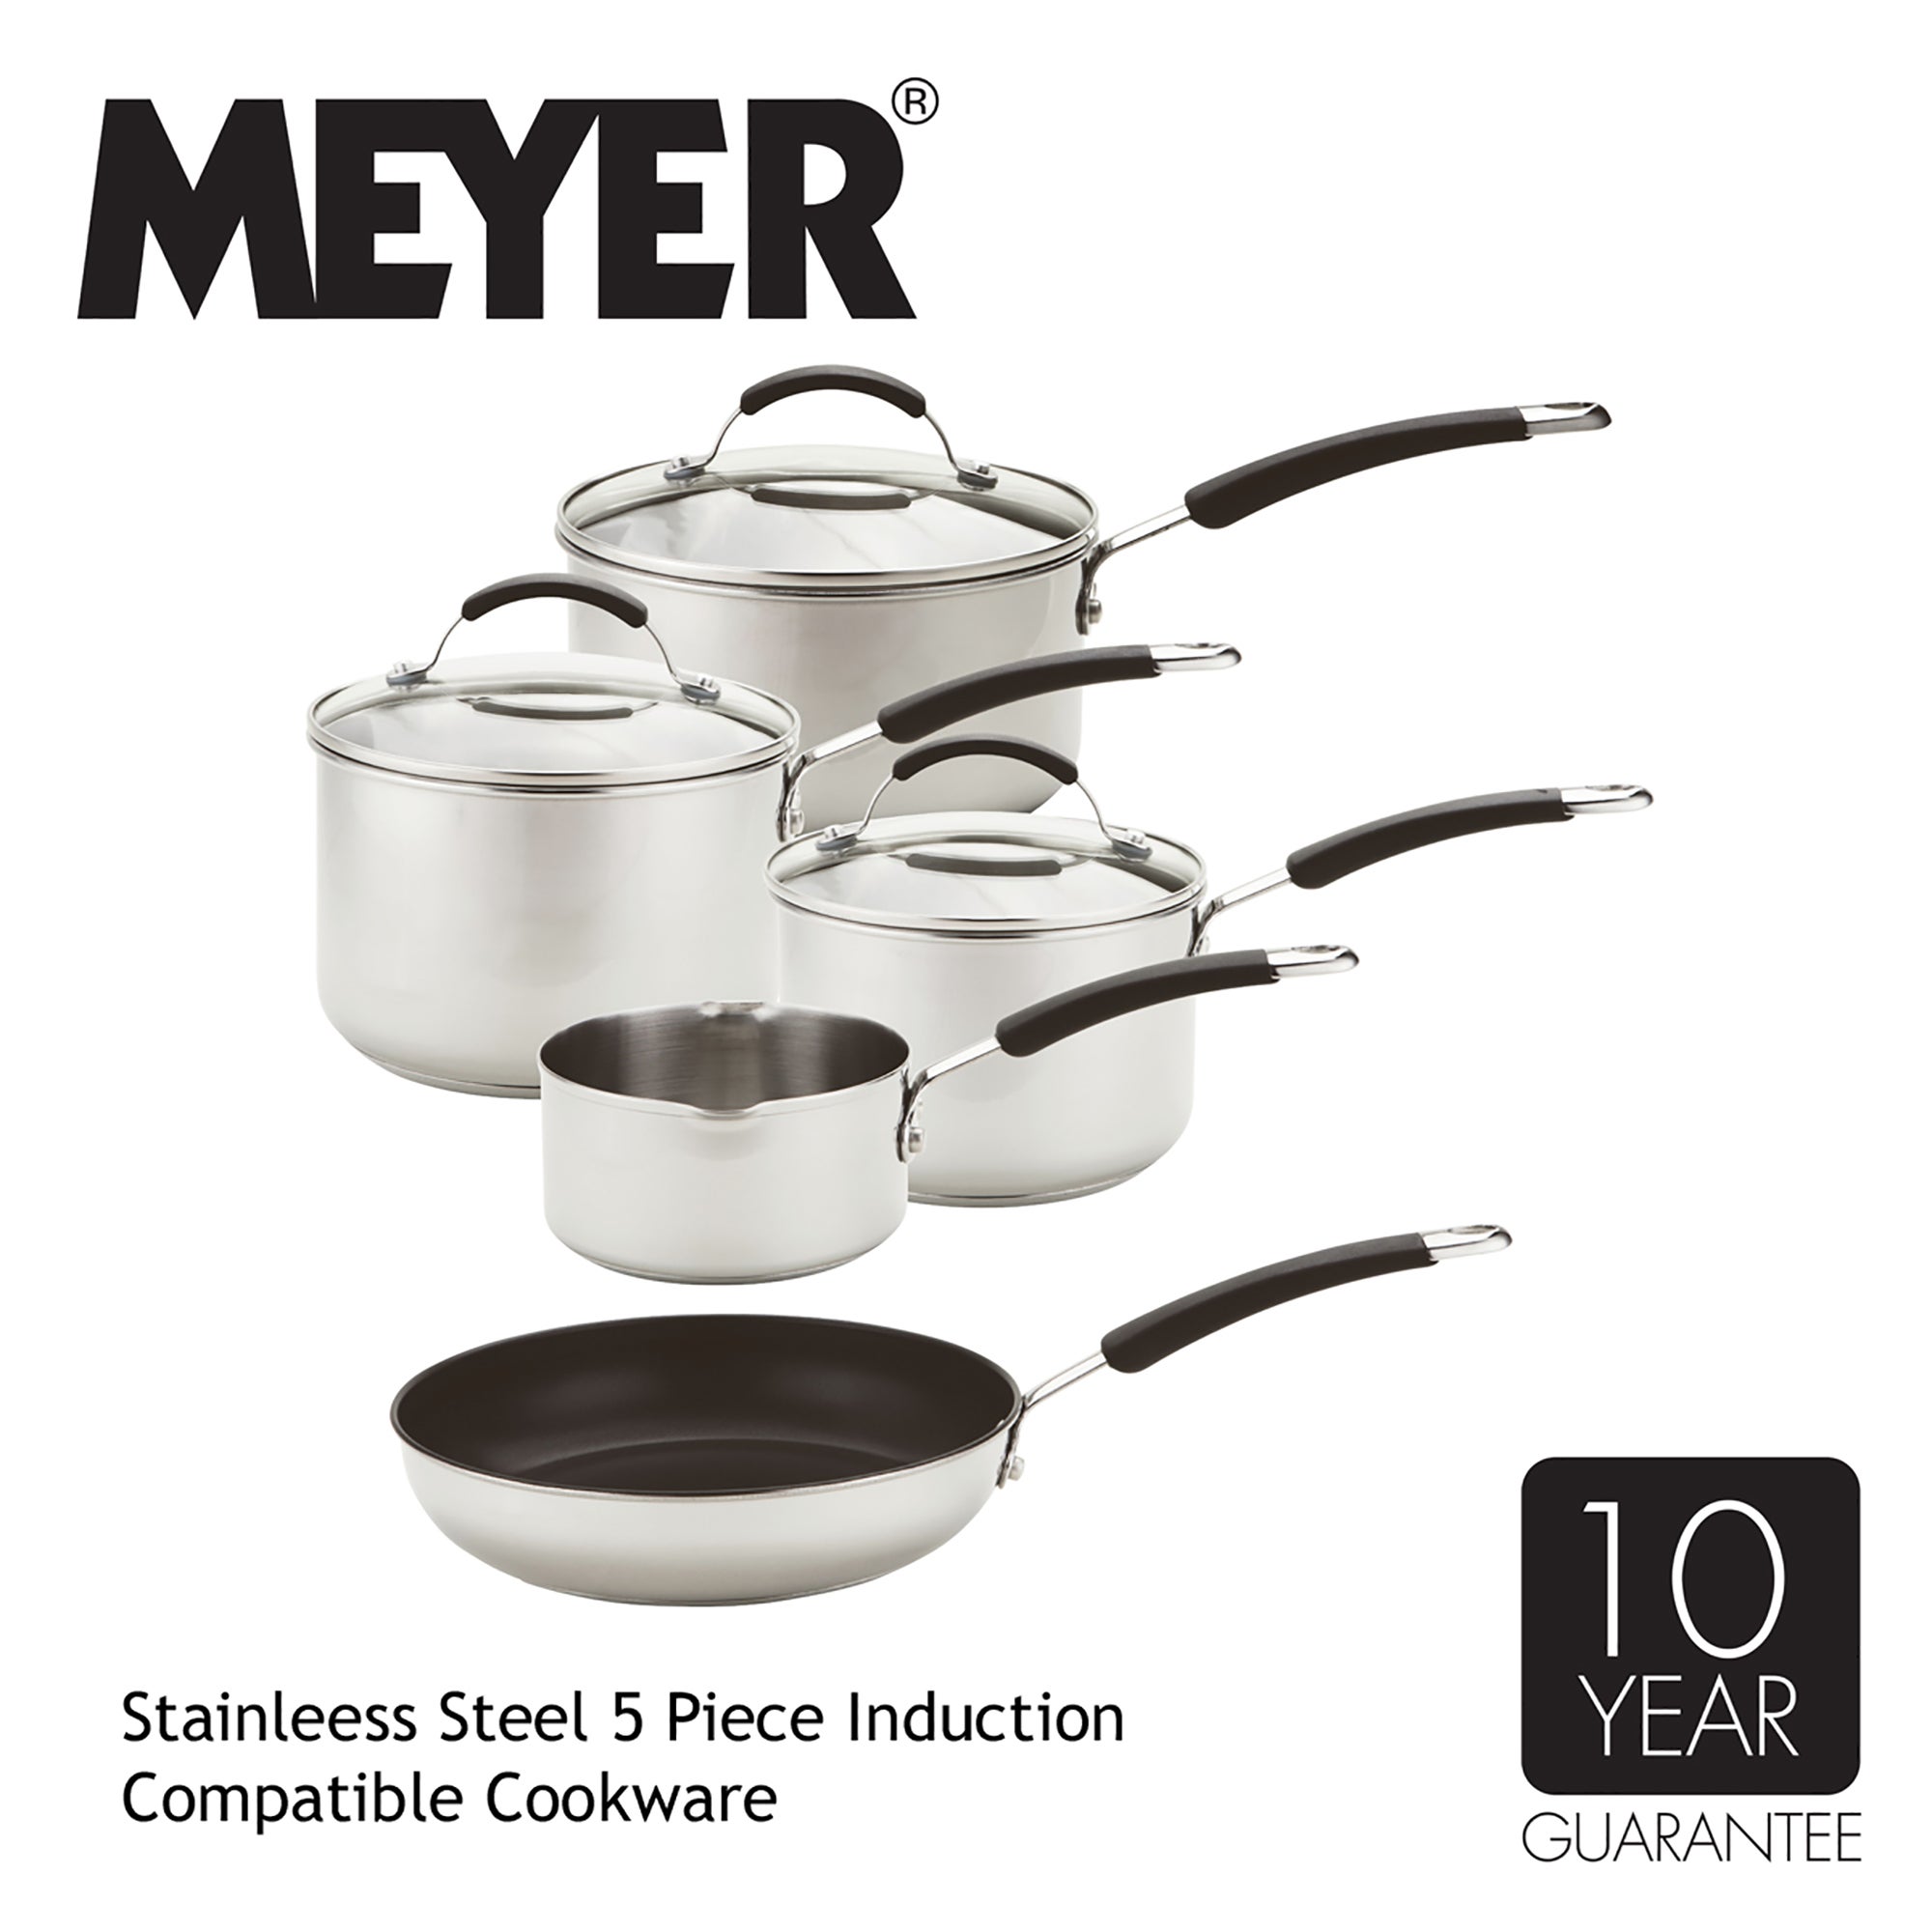 Image of Meyer Induction Stainless Steel 5 Piece Set Black/Silver